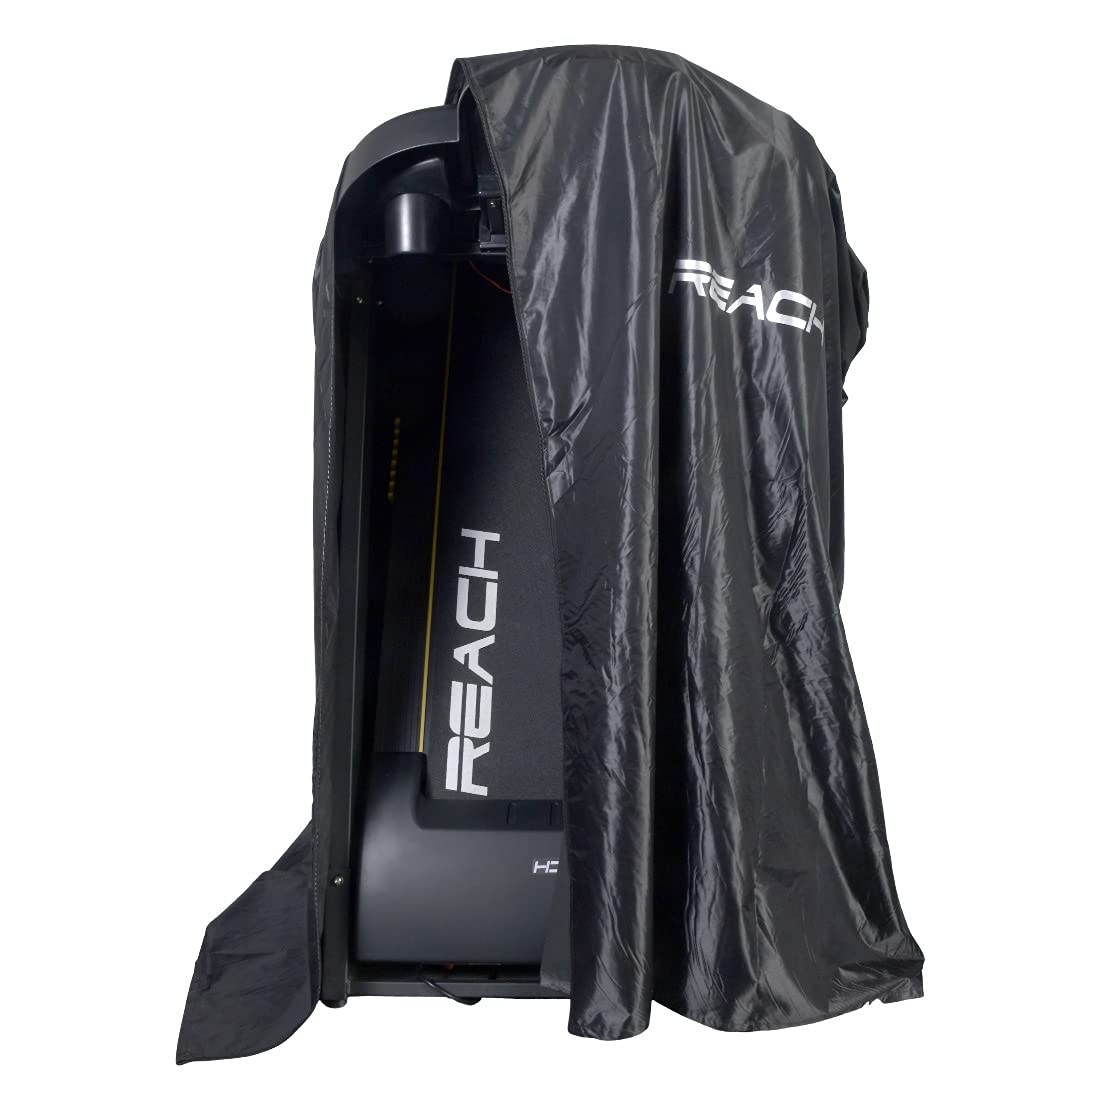 Reach Treadmill Cover (Black) | Water Proof/Dust Proof/Heat Proof | Free Size